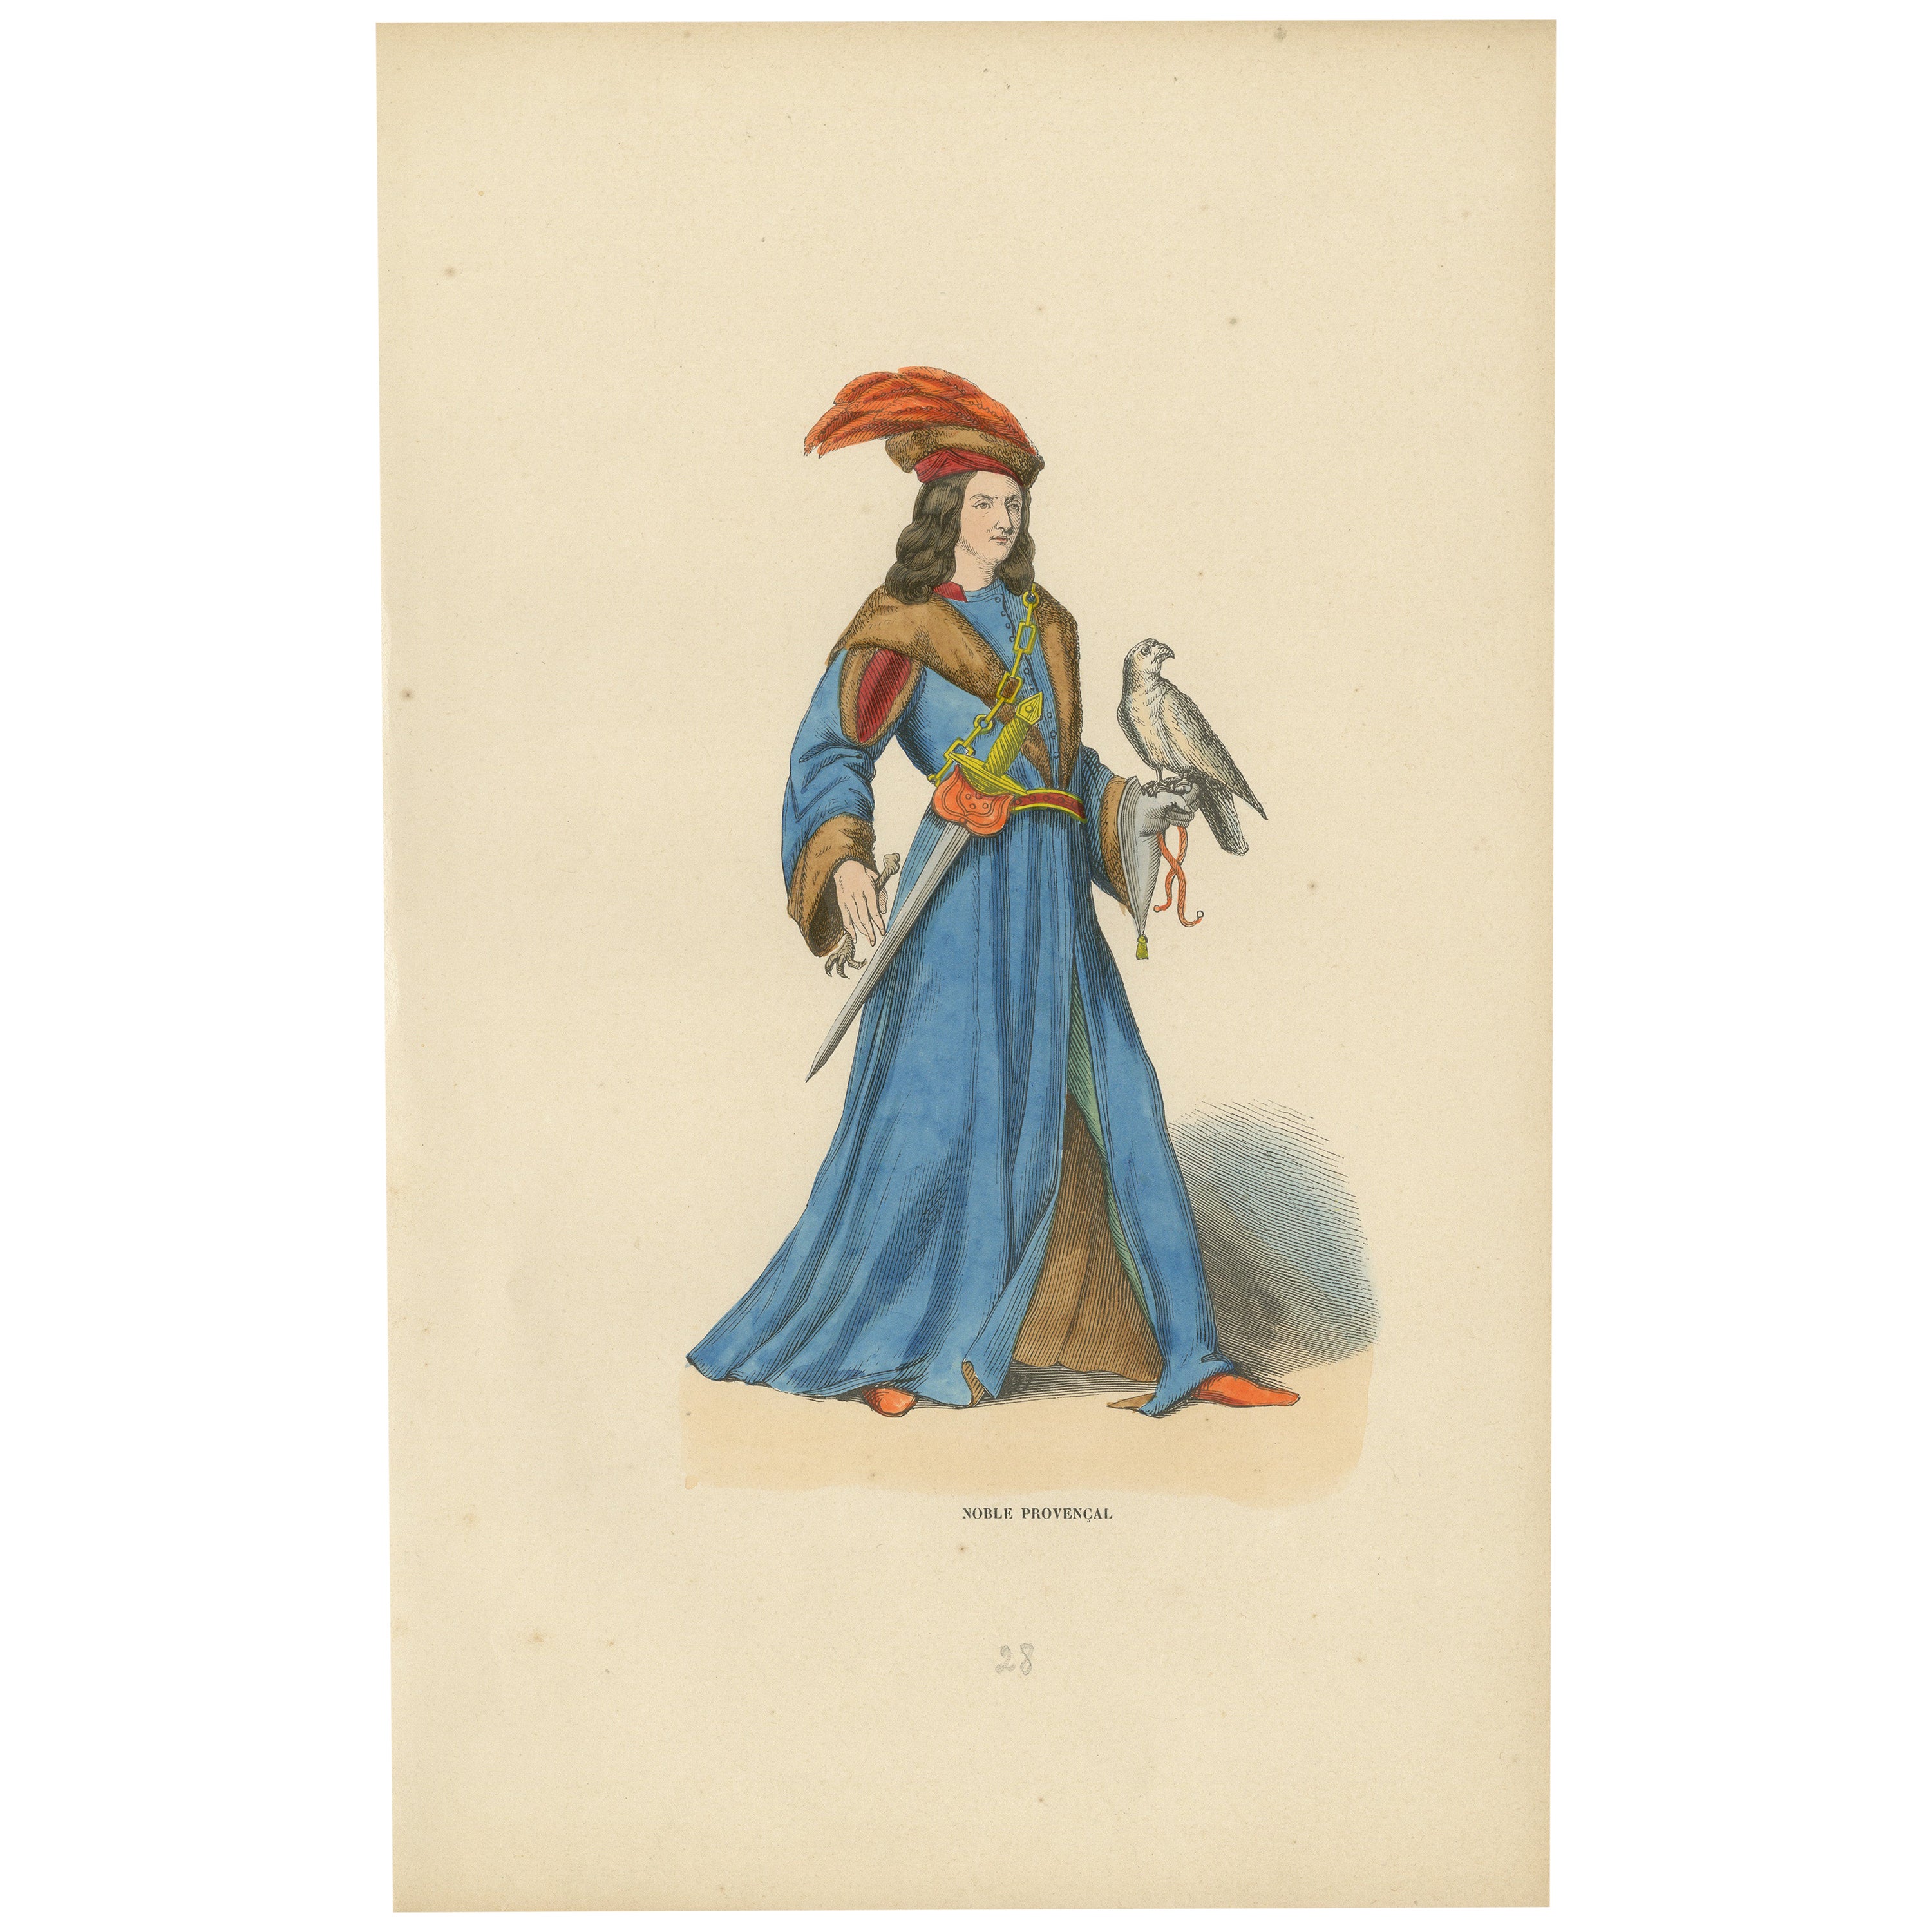 Original Hand-colored Lithograph of The Falconer: A Noble of Provence, 1845